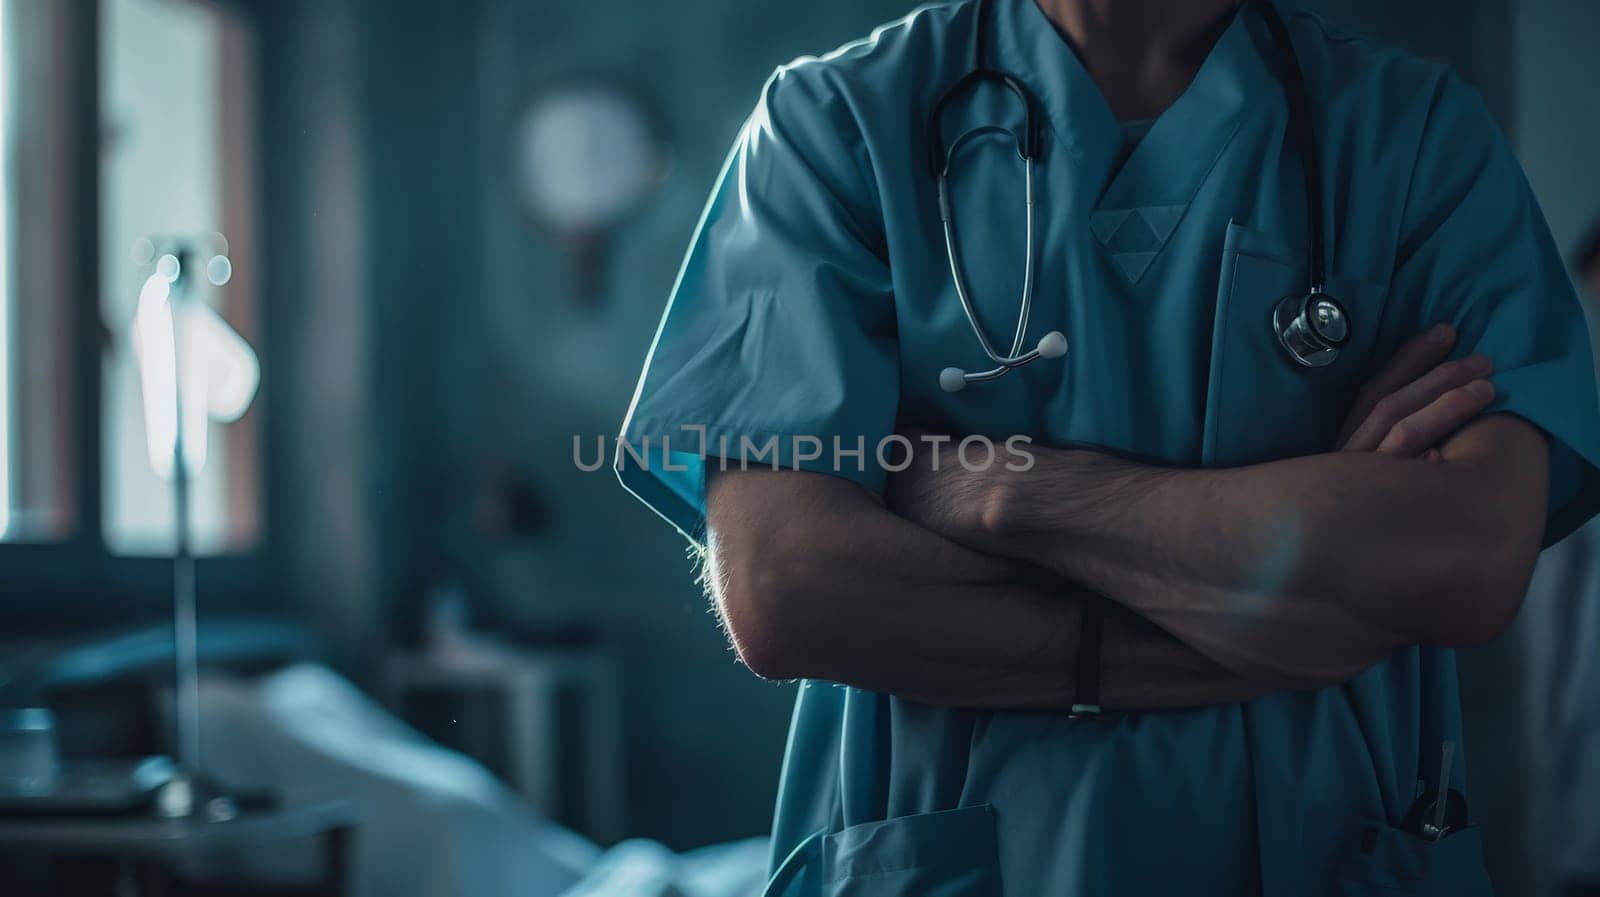 A doctor is wearing a blue coat and has a stethoscope.